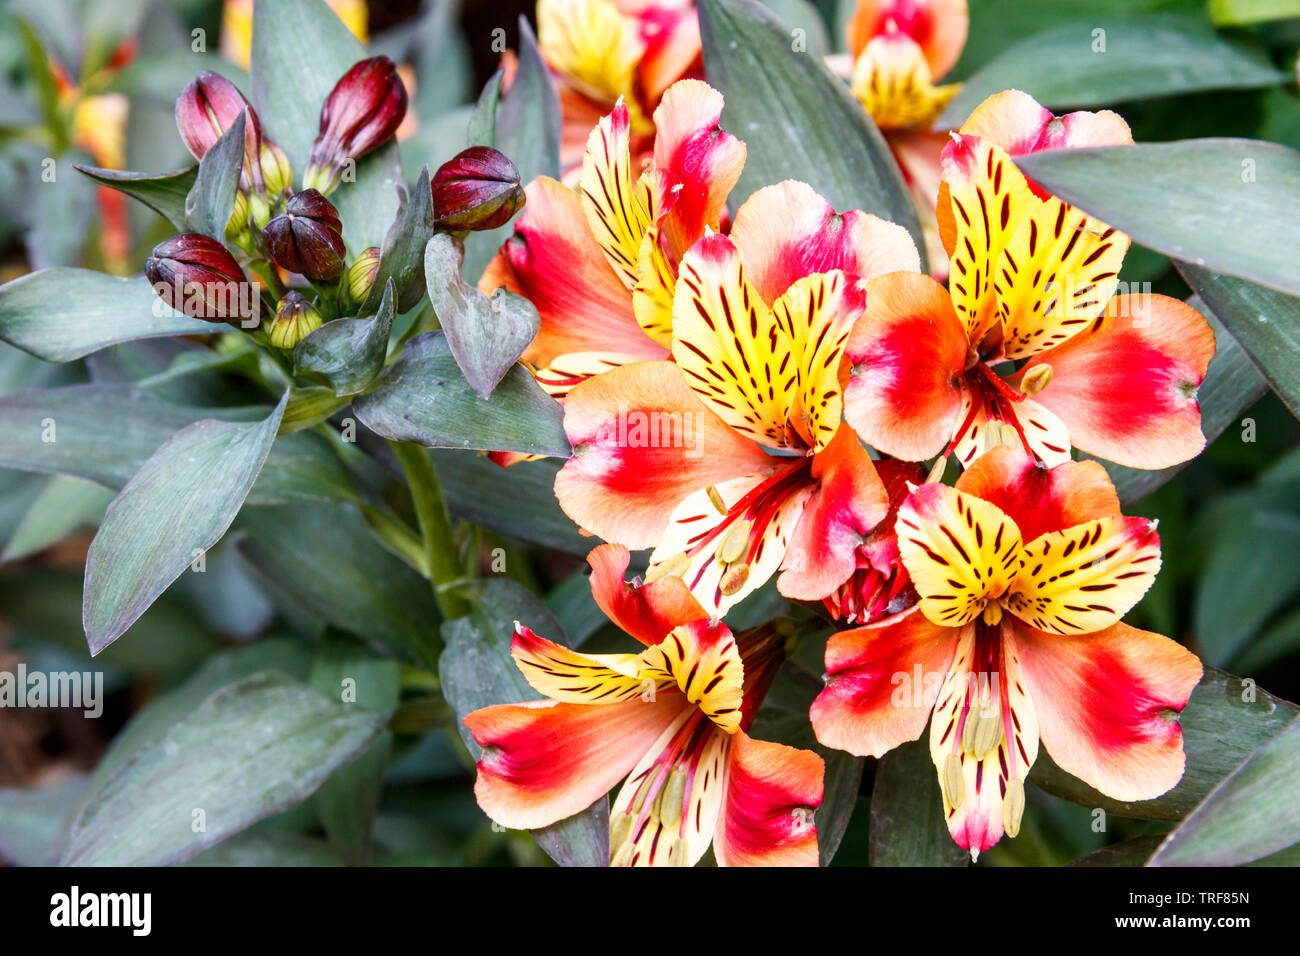 Alstroemeria, or Peruvian Lily, Indian Summer variety in a herbaceous border in suburban back garden, London, UK Stock Photo